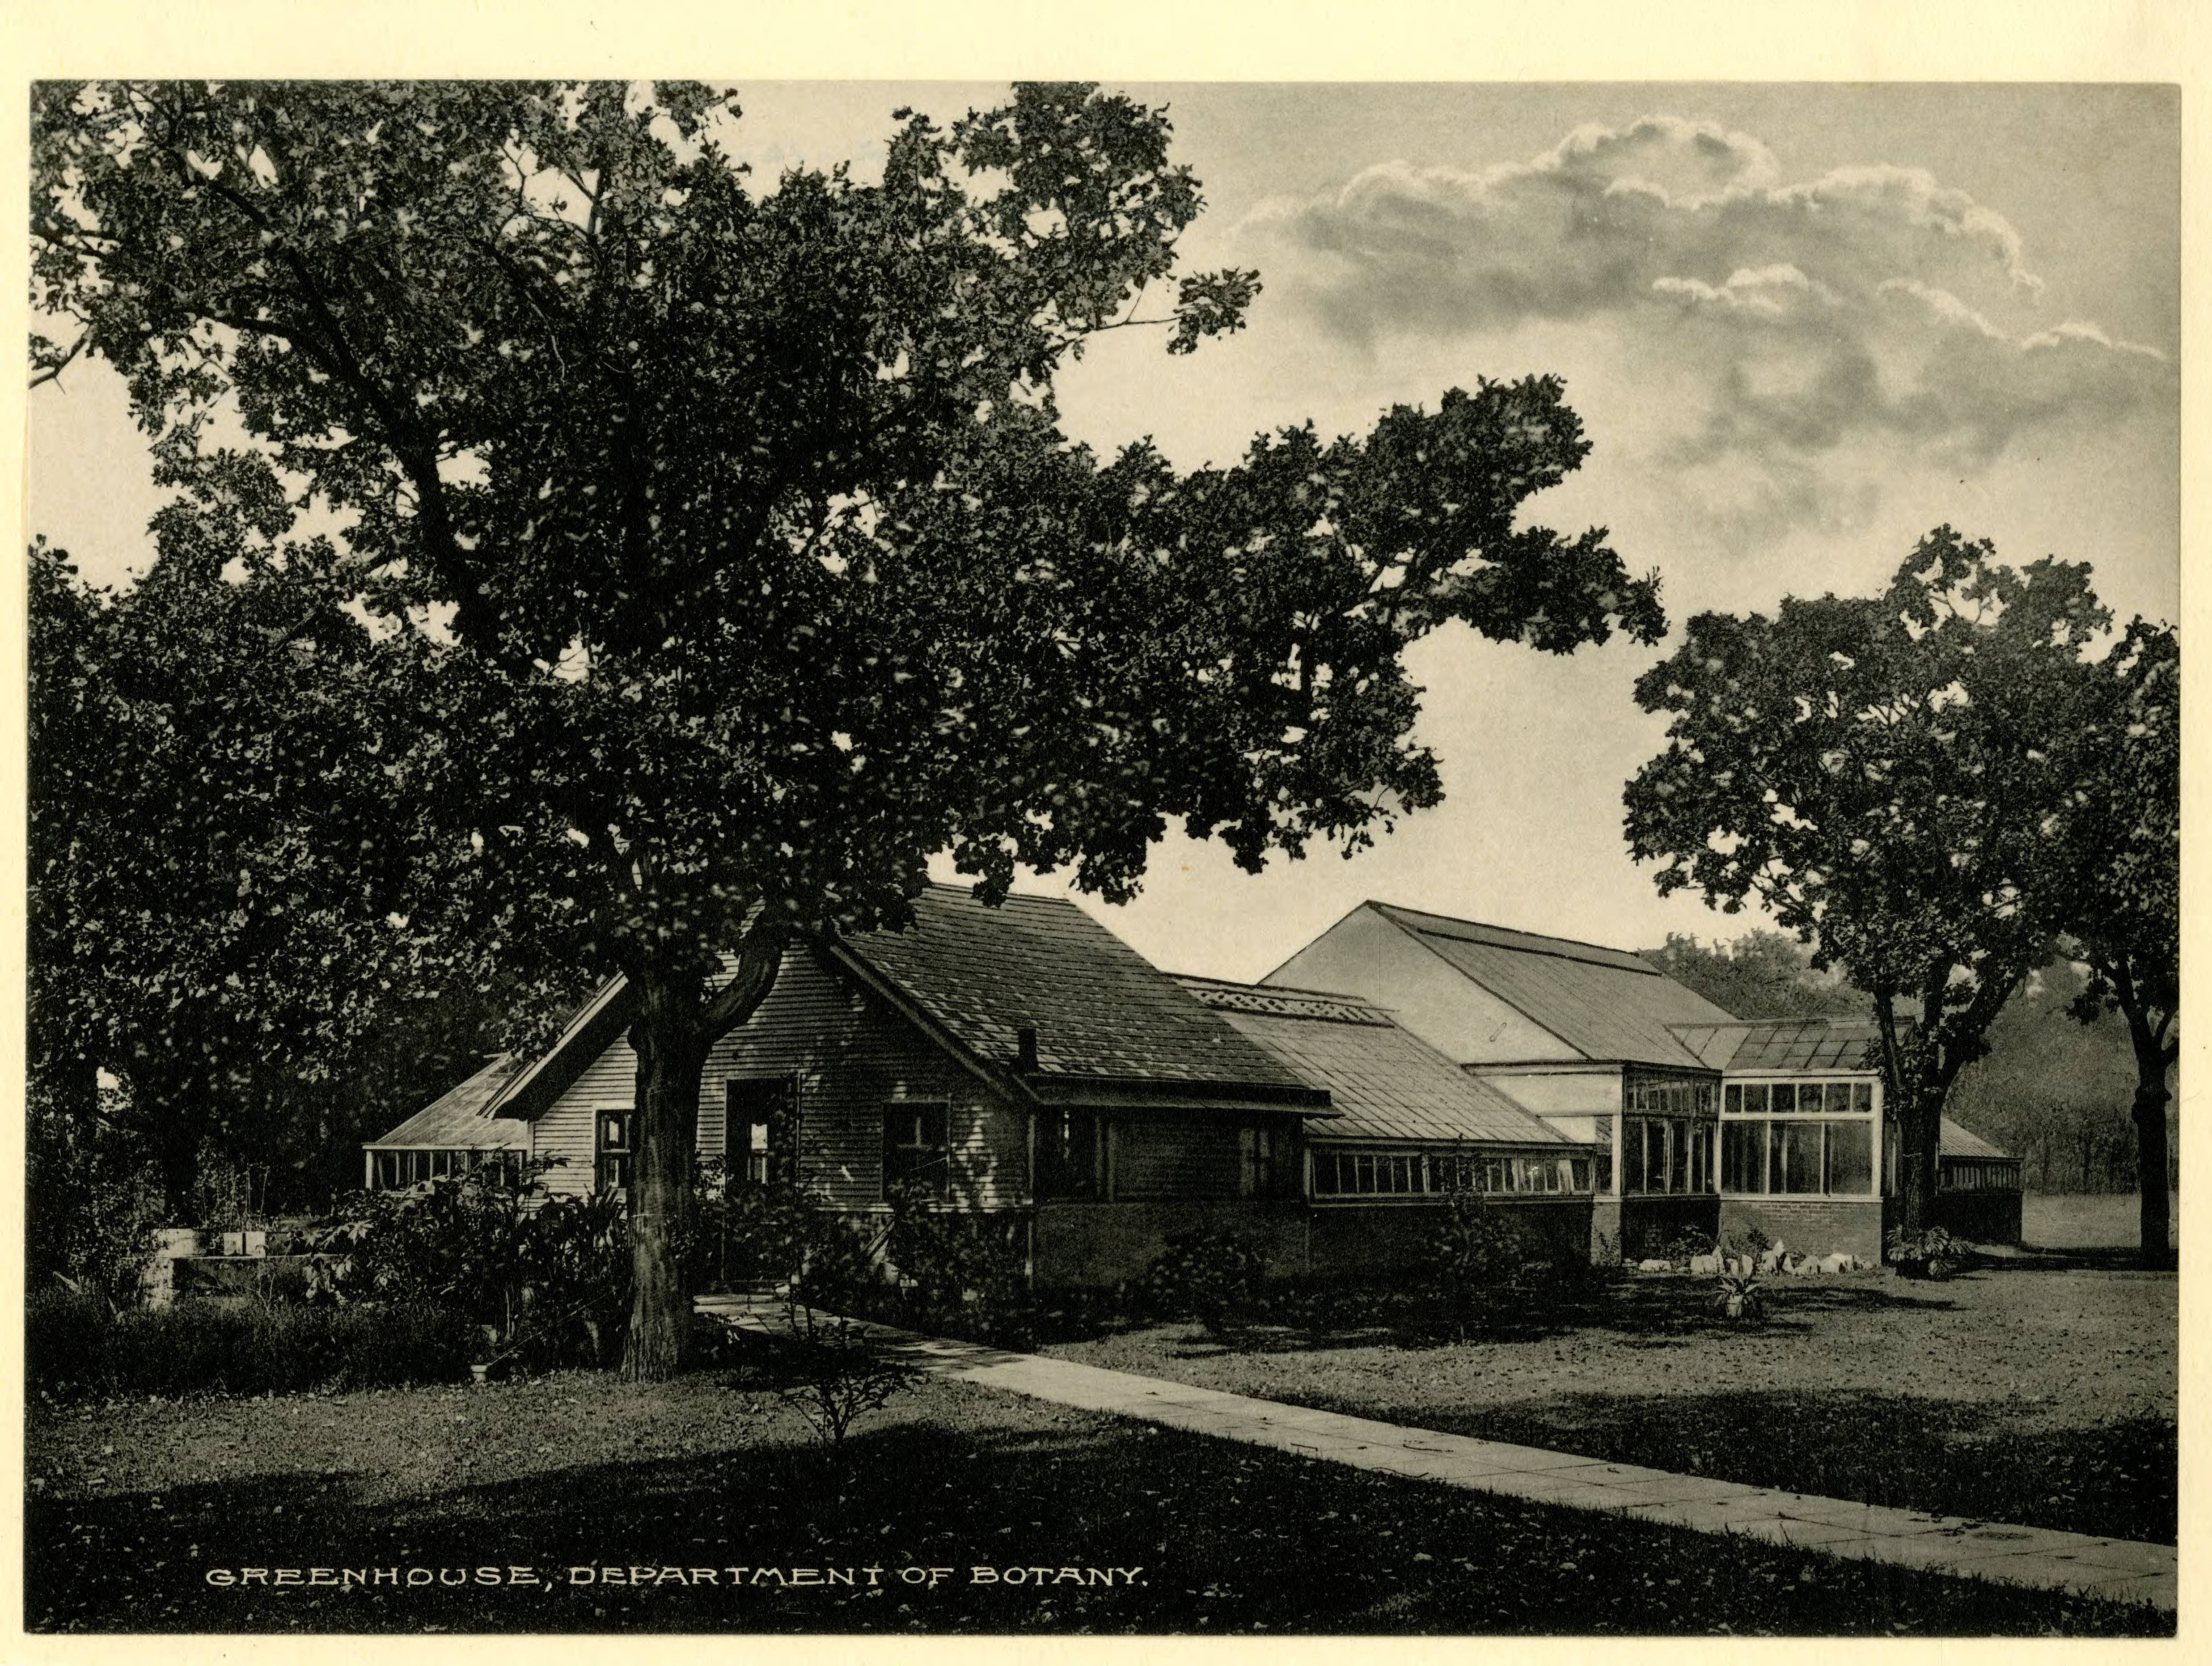 A sepia photograph of an early 20th century greenhouse with large stately trees outside